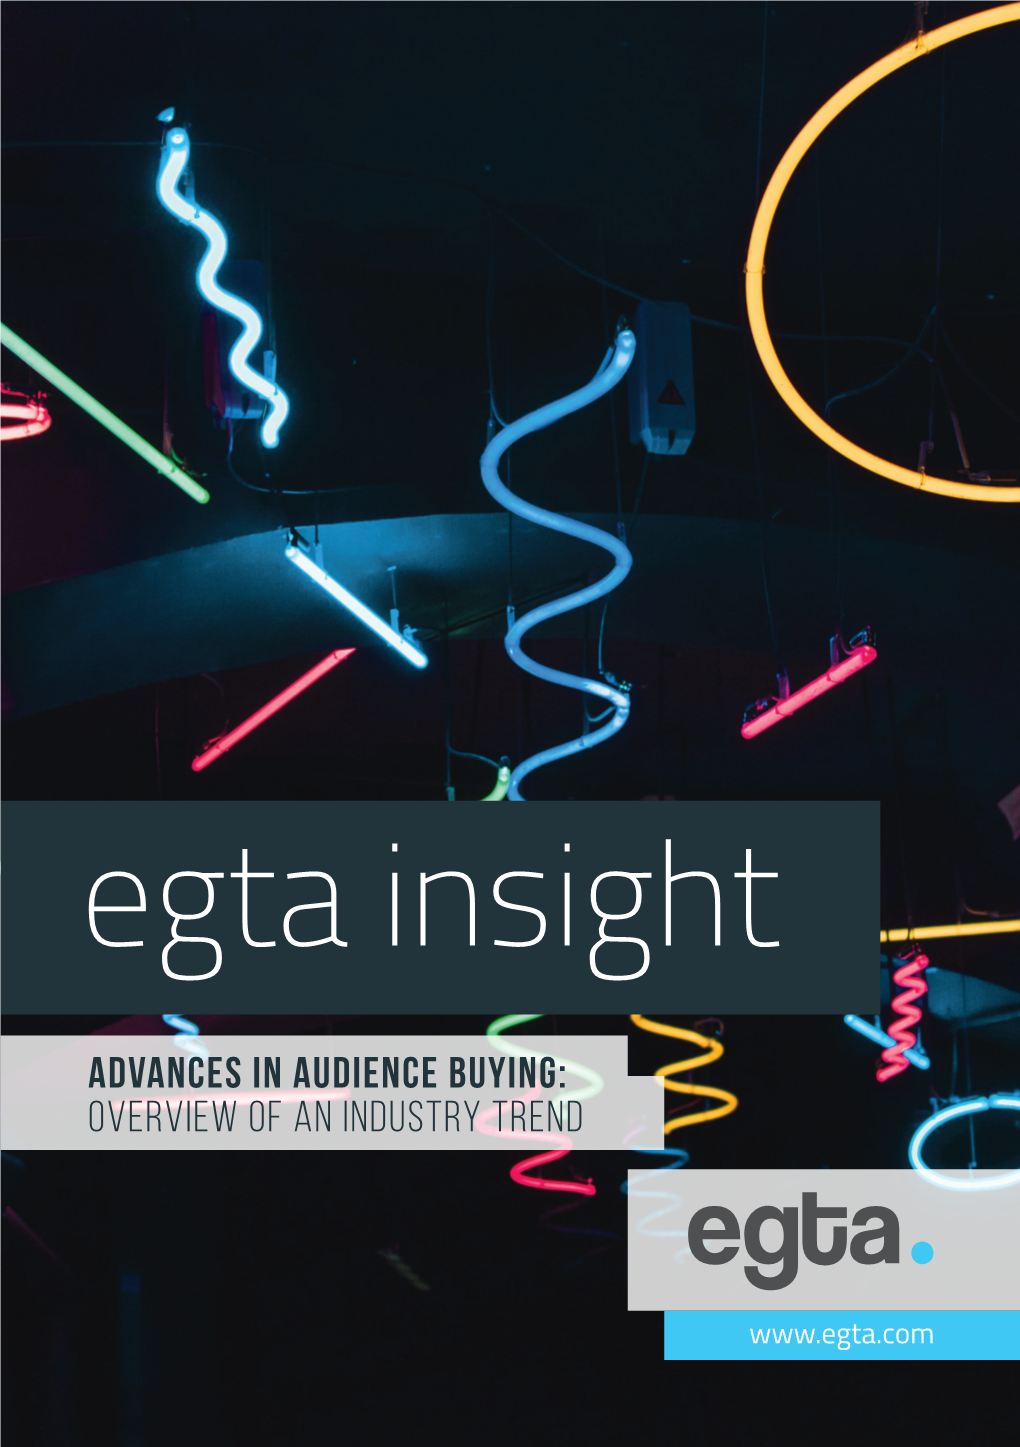 Egta Insight Advances in Audience Buying: Overview of an Industry Trend